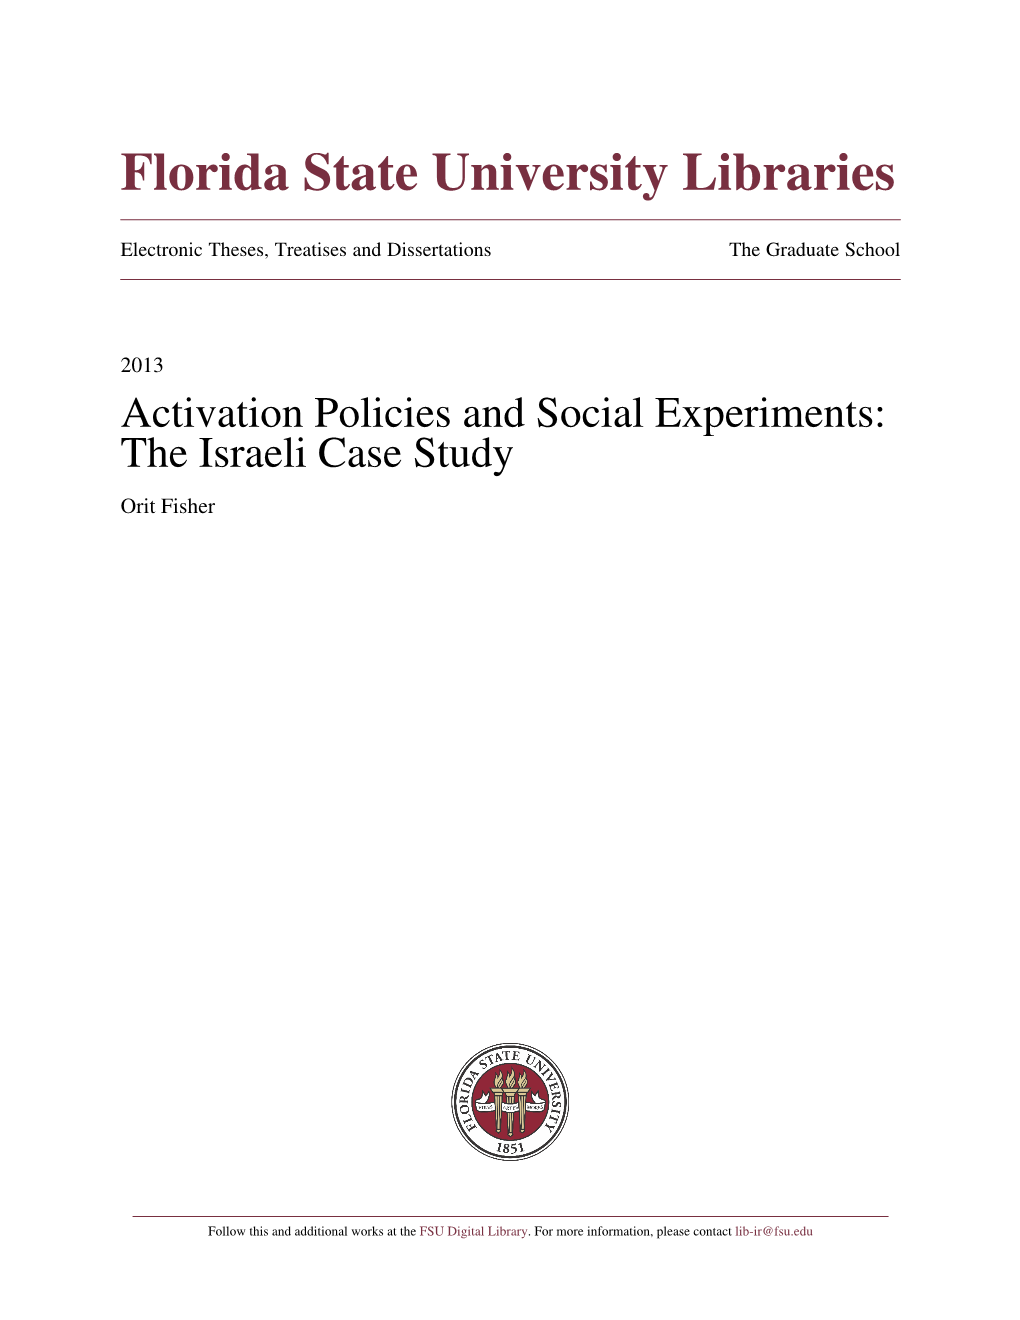 Activation Policies and Social Experiments: the Israeli Case Study Orit Fisher